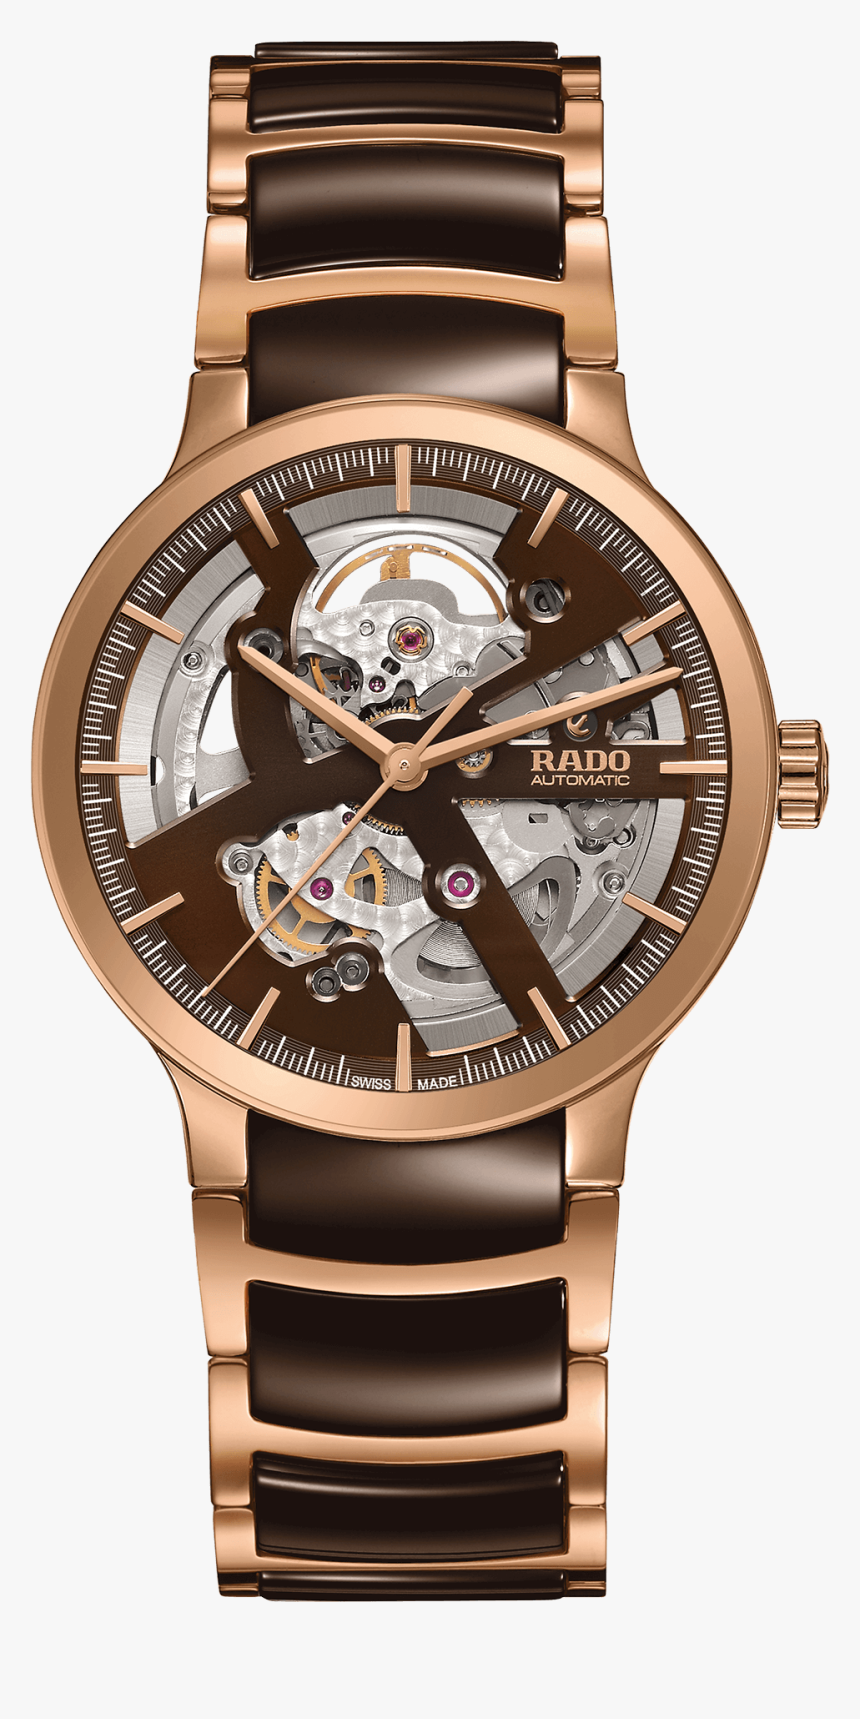 Centrix Automatic Open Heart R30181312 - Rado Open Heart Watch, HD Png Download, Free Download